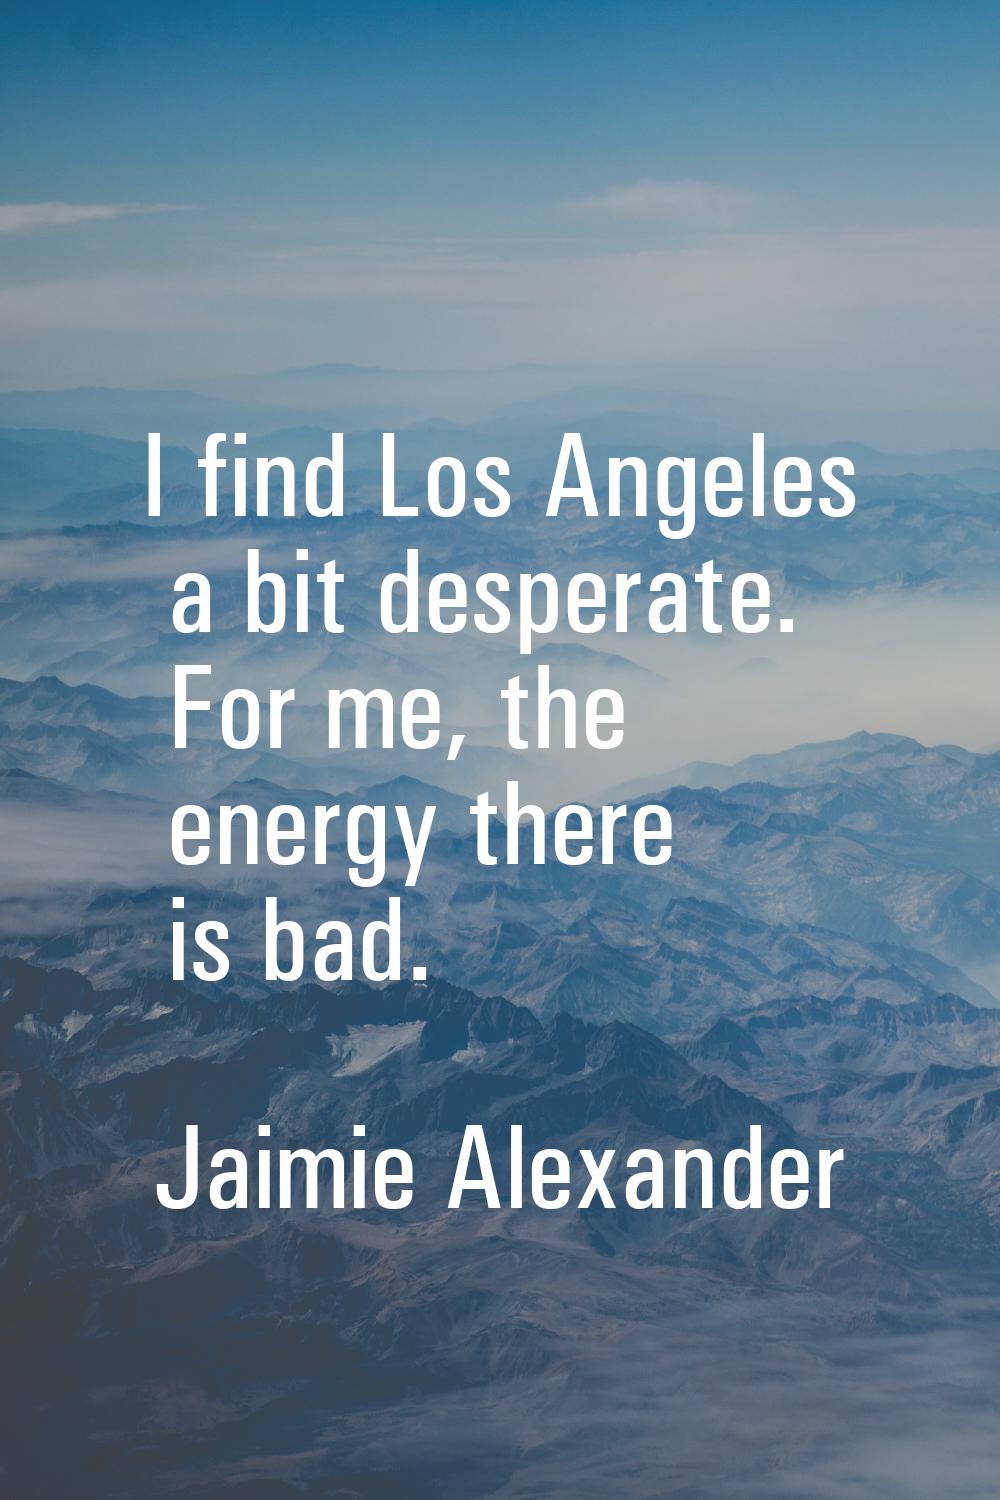 I find Los Angeles a bit desperate. For me, the energy there is bad.